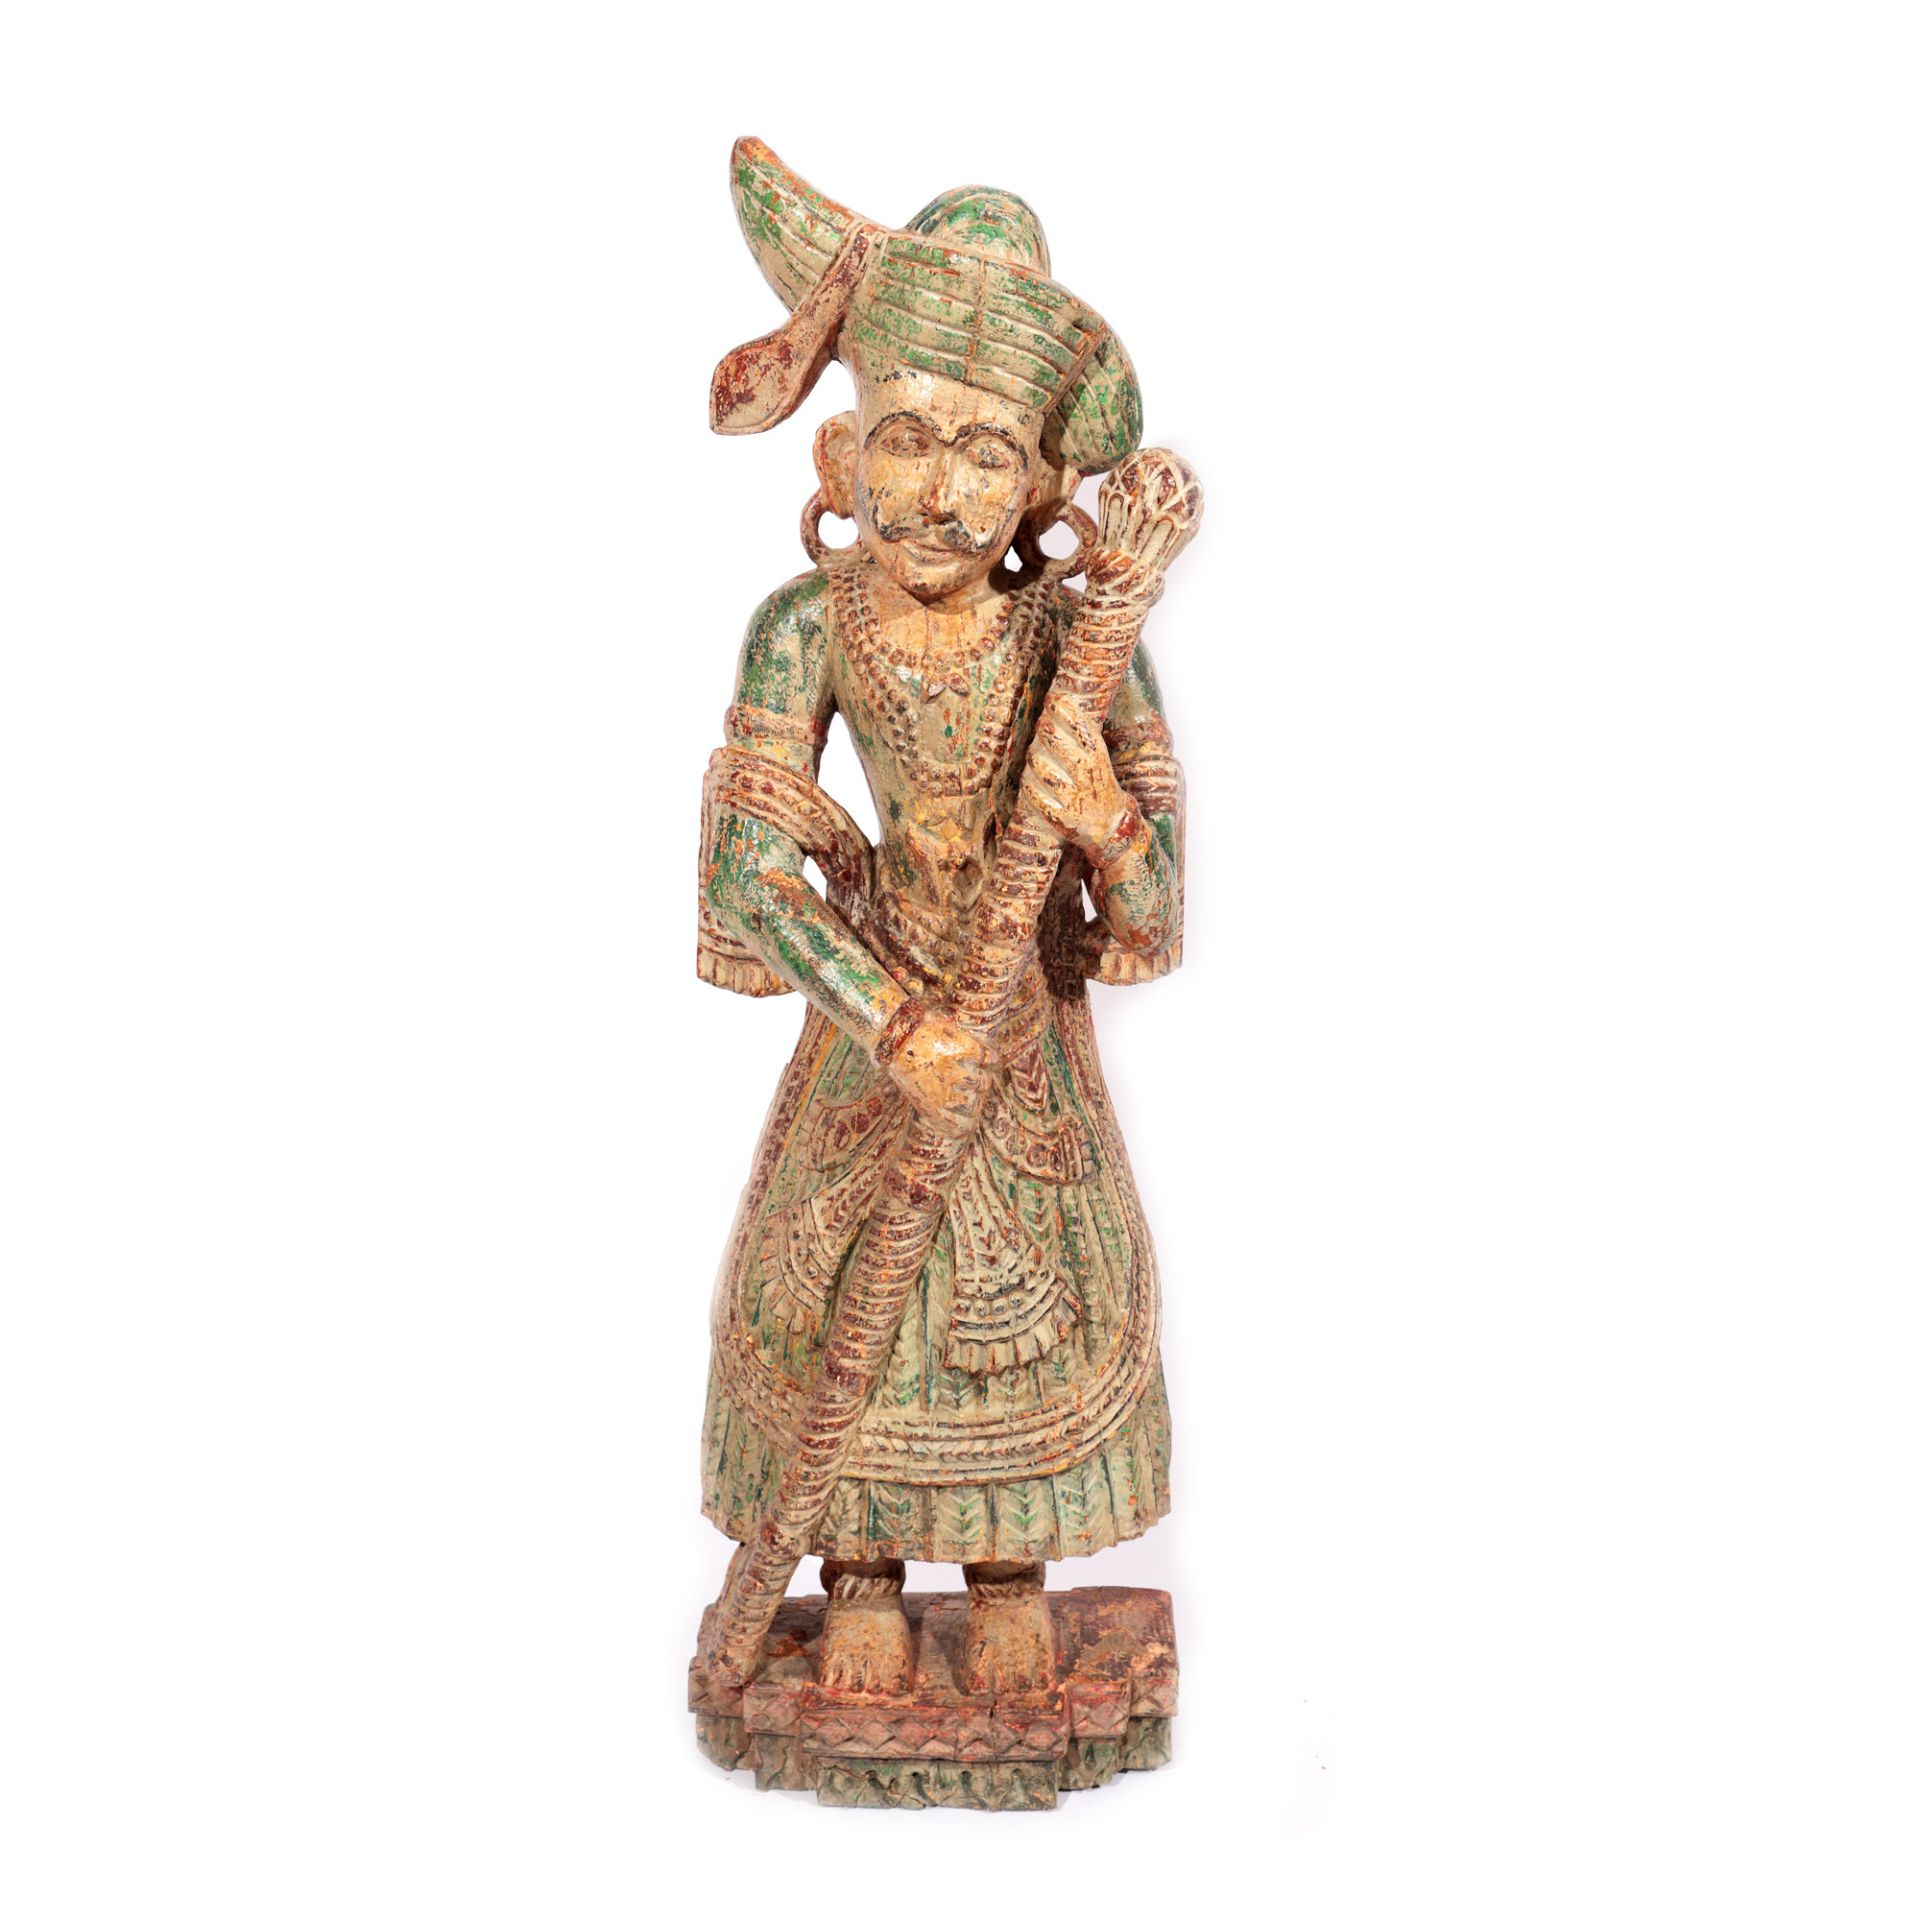 Indo-Persian statuette, painted wood, depicting a fighter, possibly early 19th century